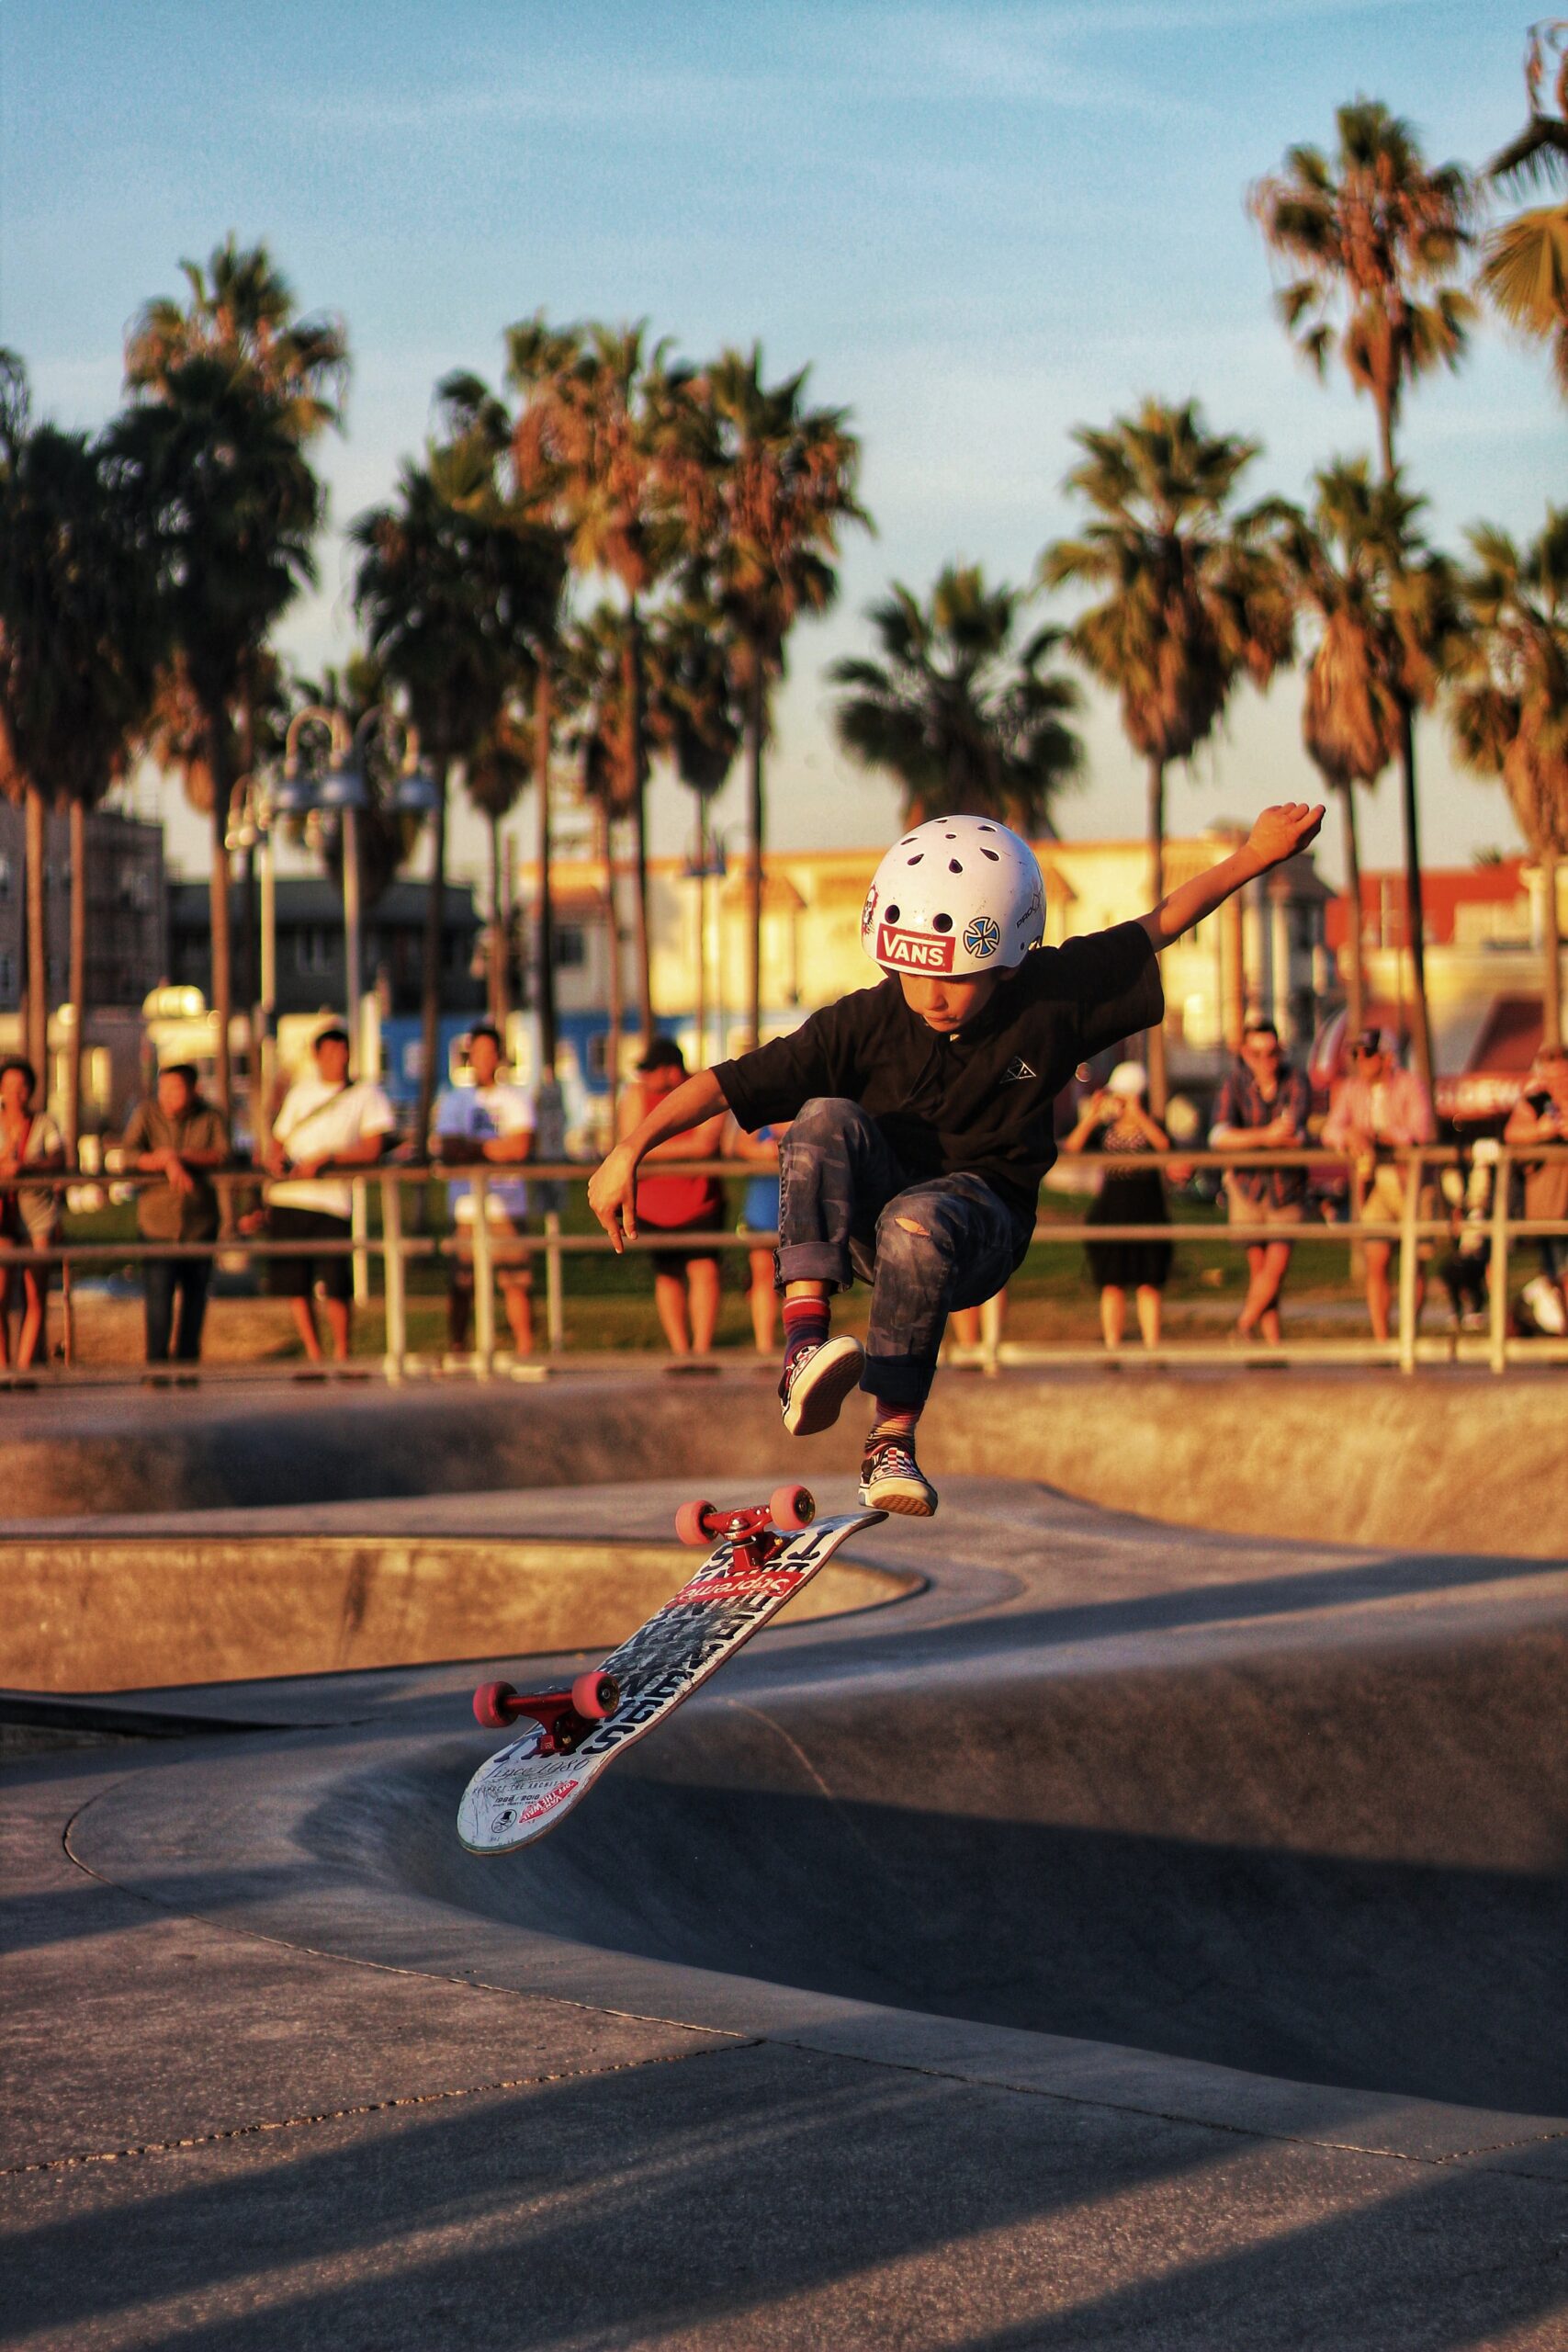 How Do You Choose The Right Skateboard Helmet For Safety And Style?